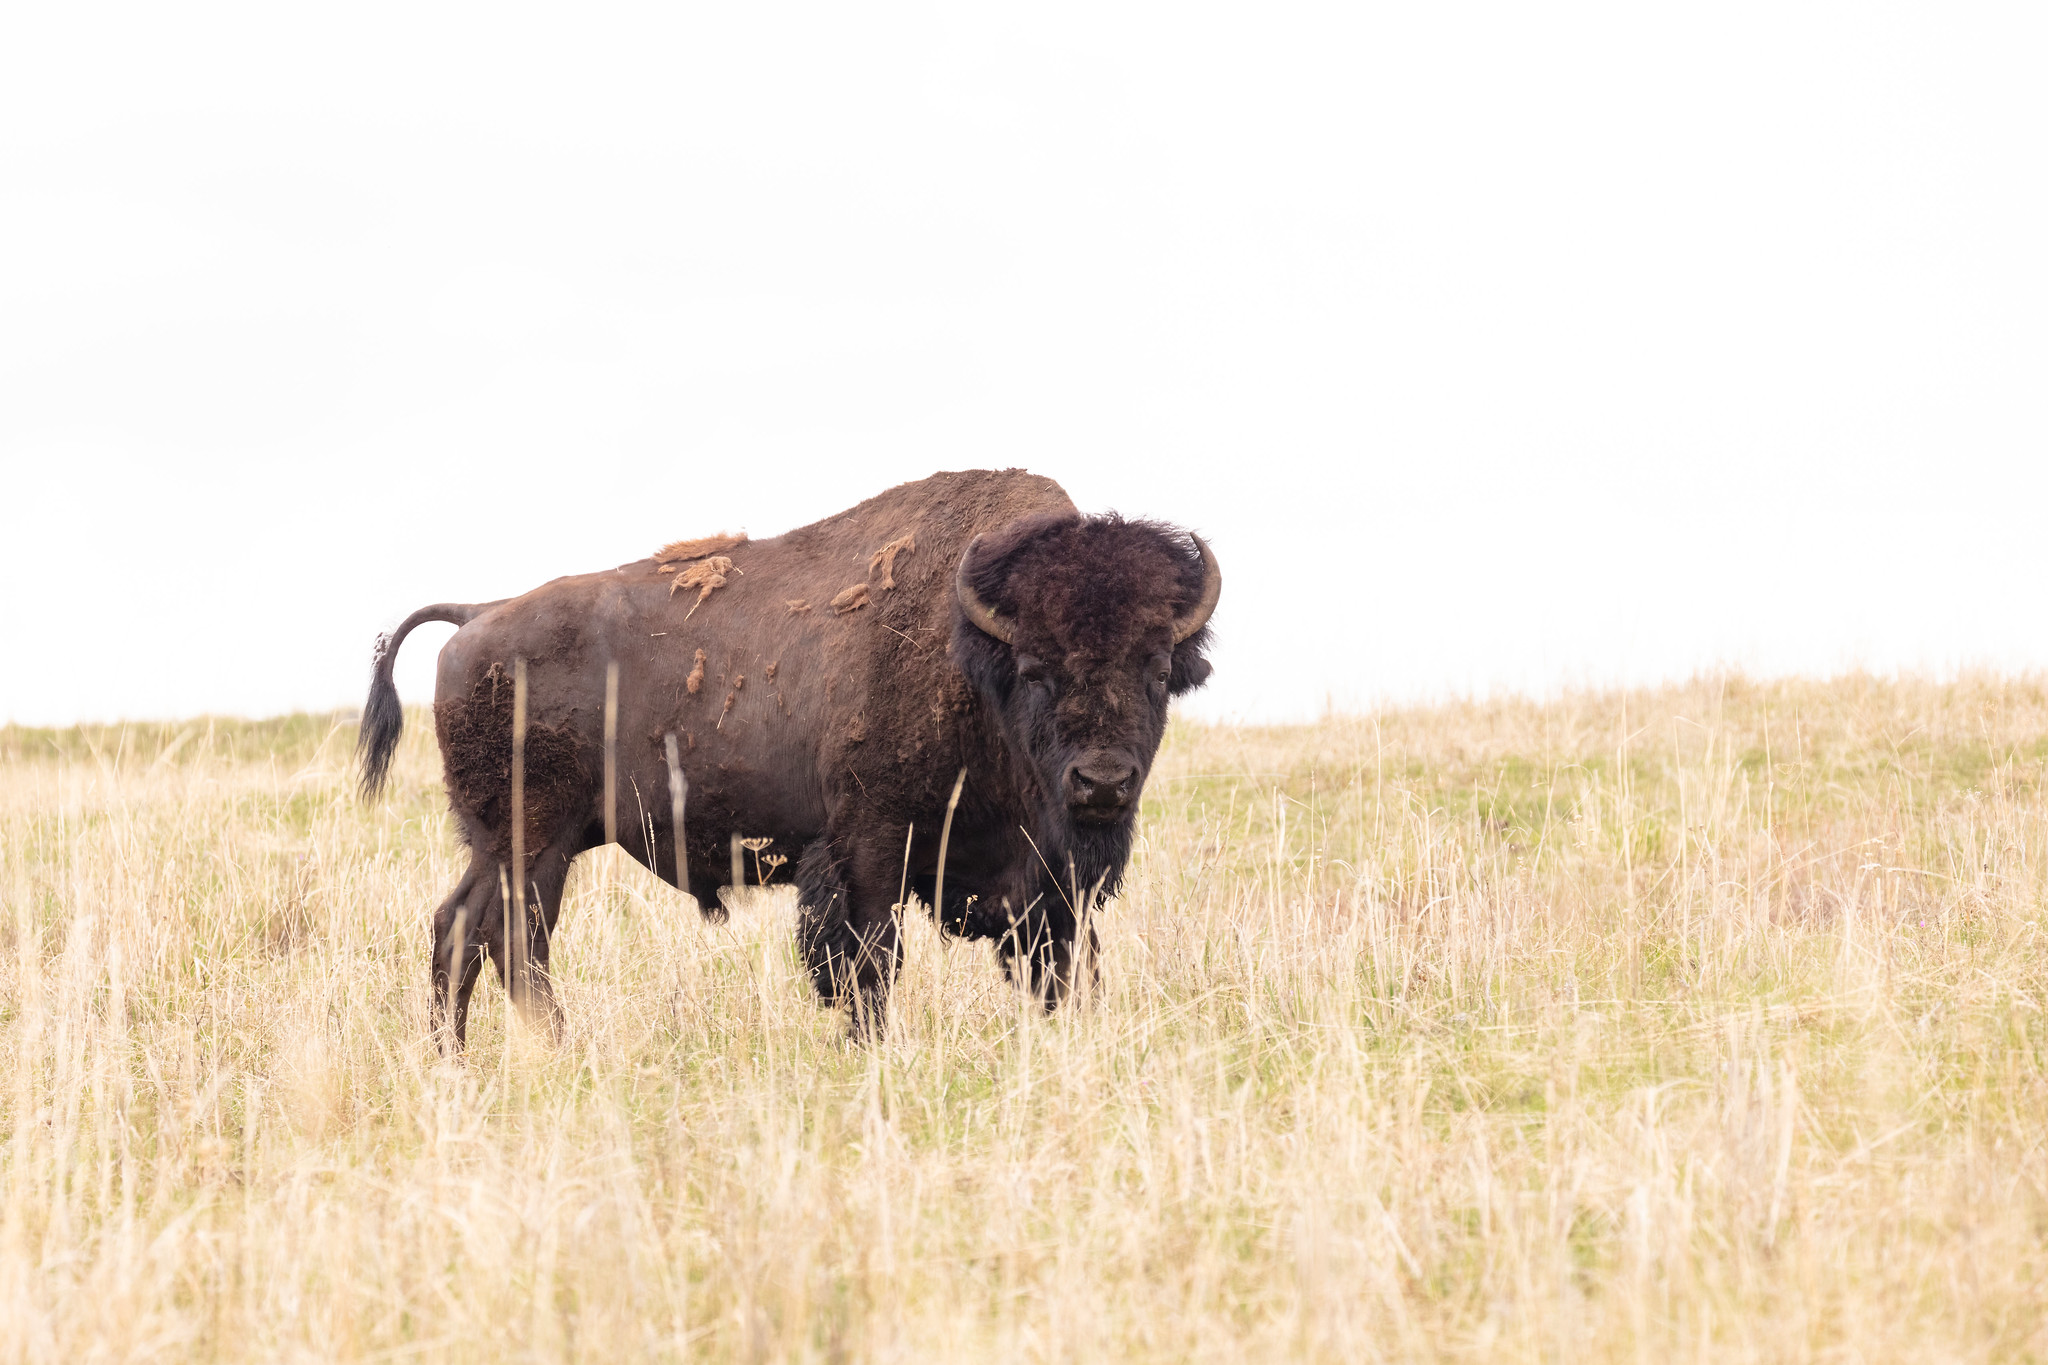 a large bison walking through a grassy field